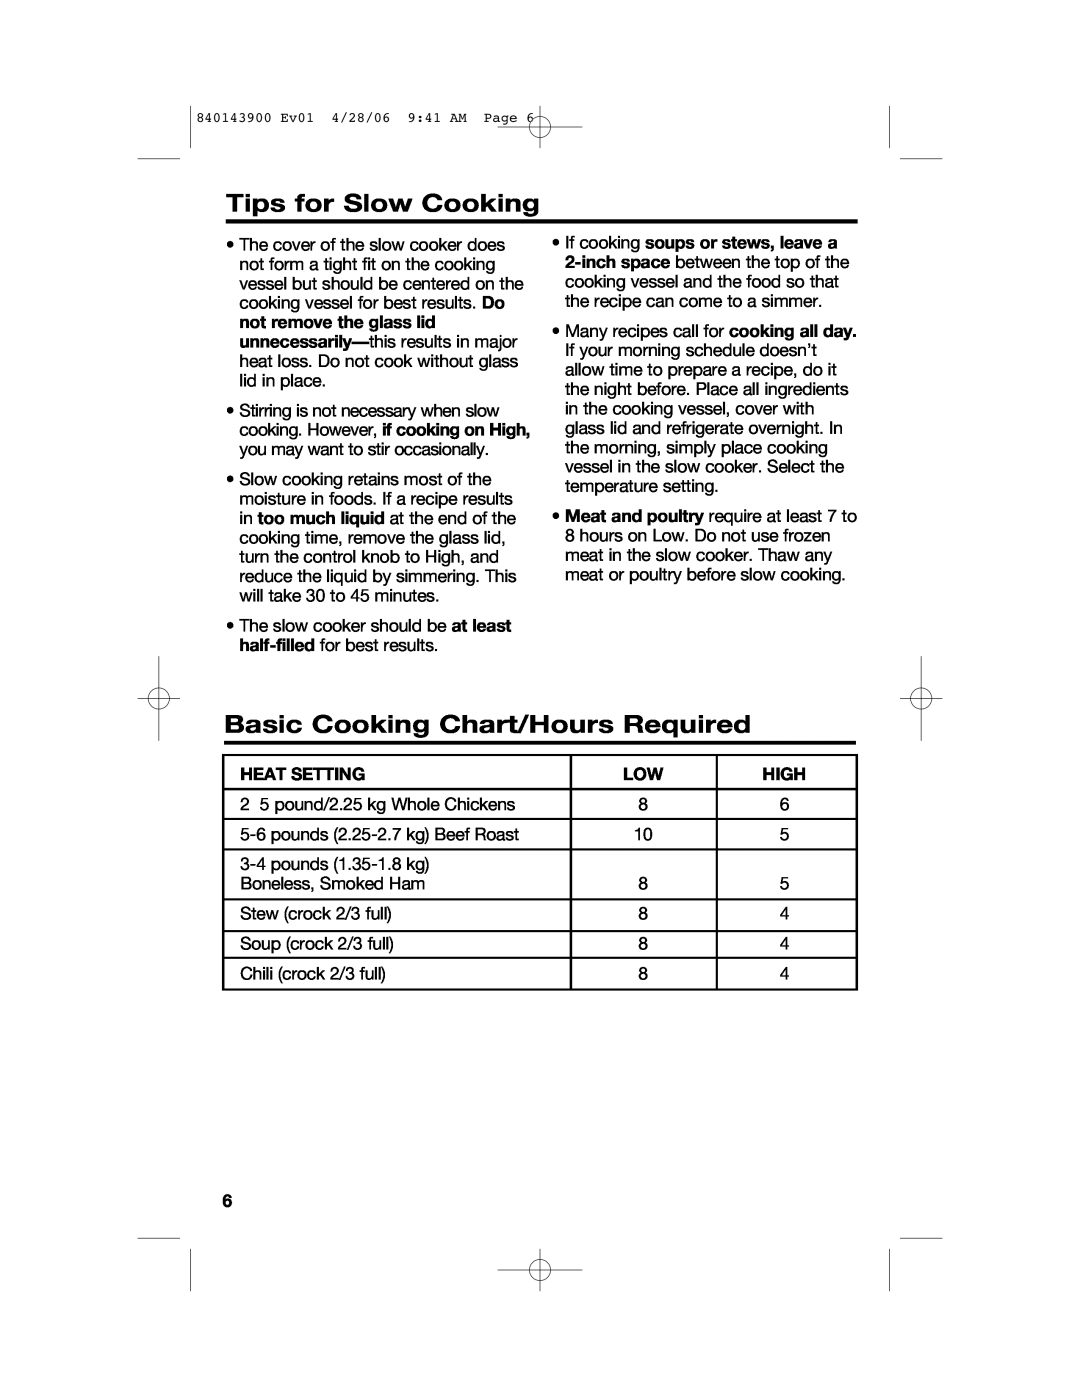 Hamilton Beach 840143900 Tips for Slow Cooking, Basic Cooking Chart/Hours Required, •If cooking soups or stews, leave a 